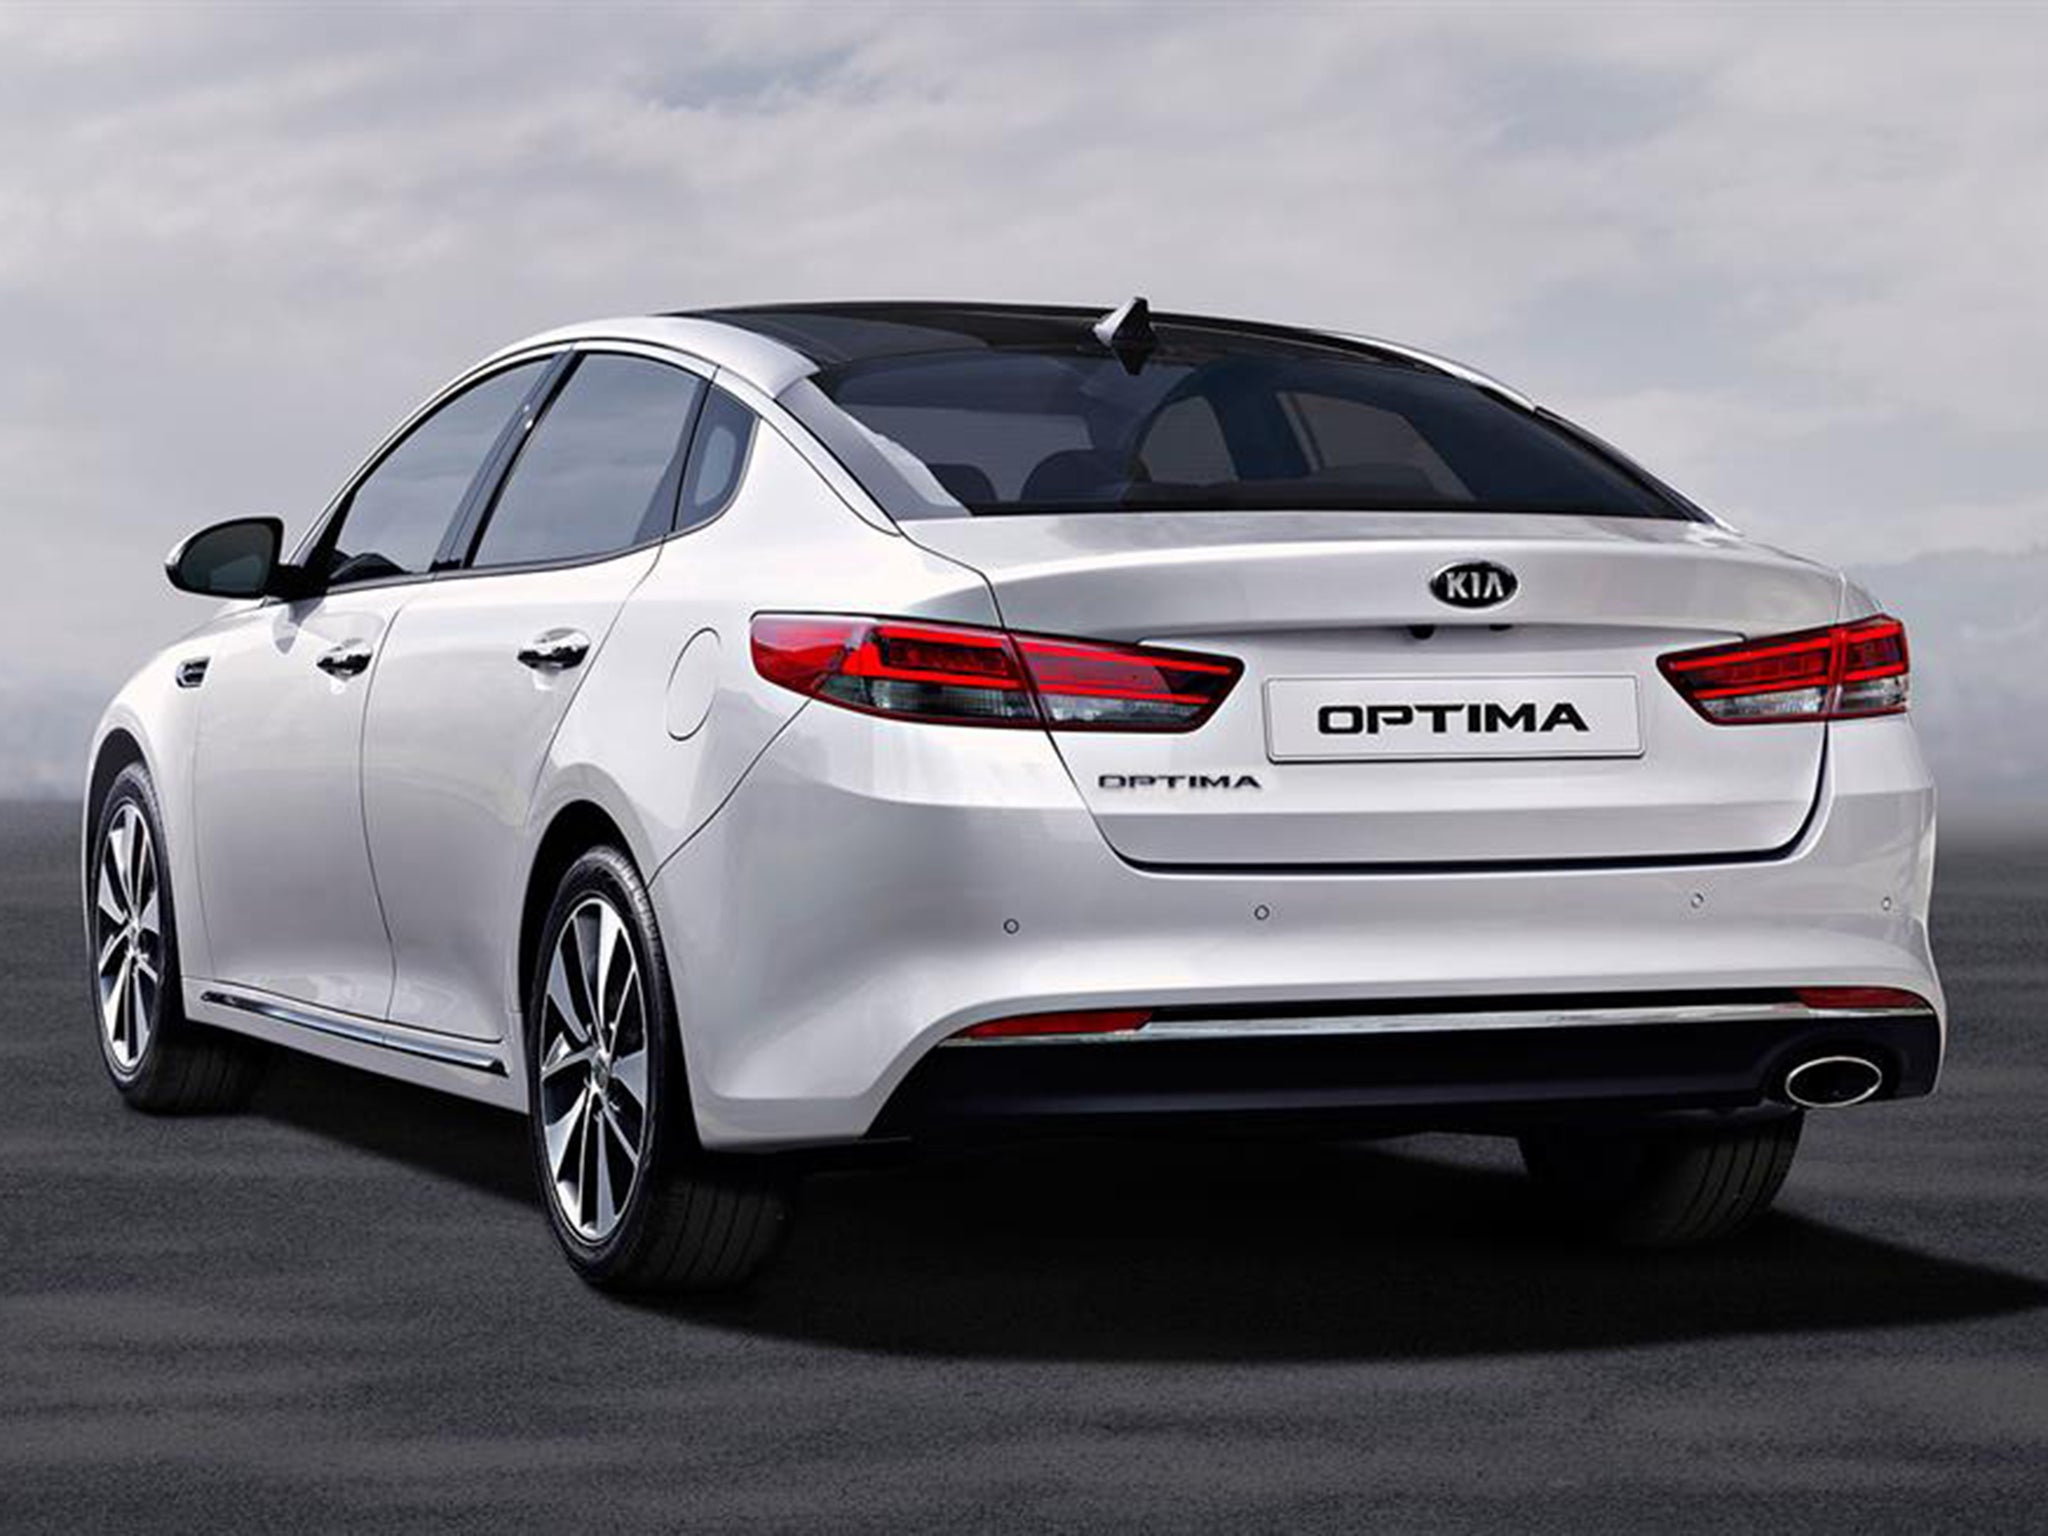 The company intends to follow up with an Optima Estate during the course of 2016